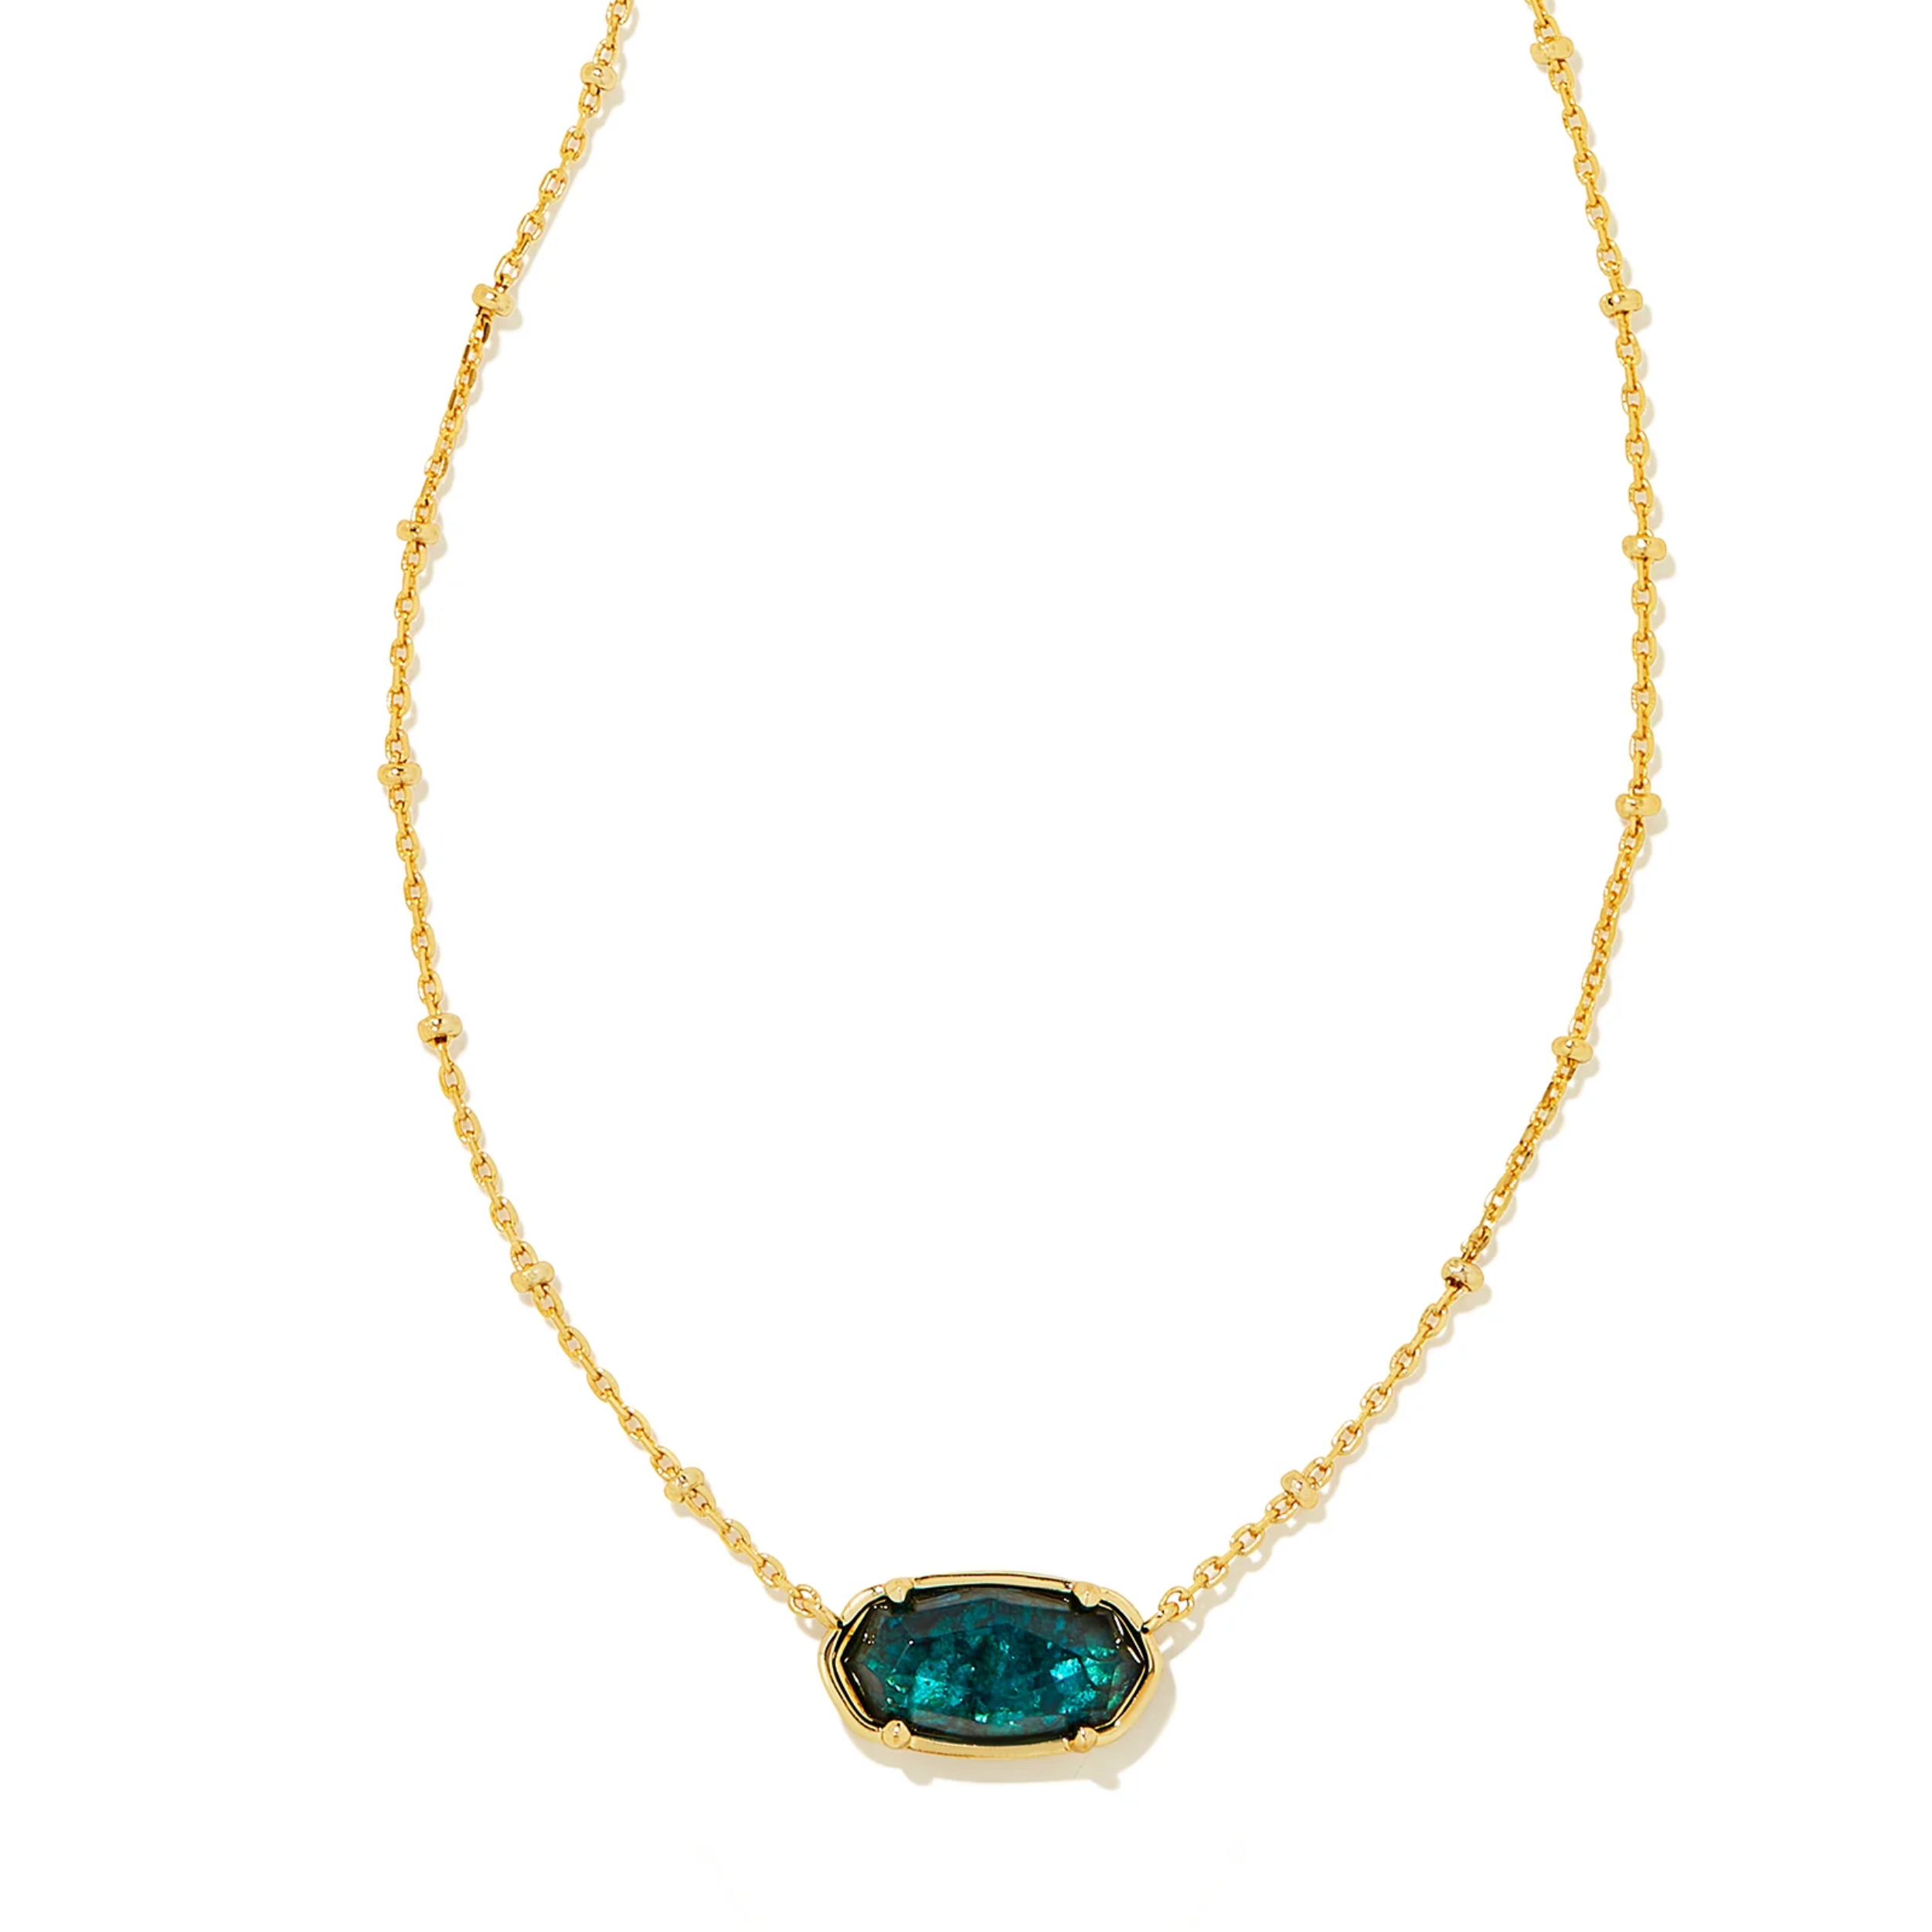 This Faceted Elisa Gold Pendent Necklace in Dark Teal Mica by Kendra Scott is pictured on a white background.